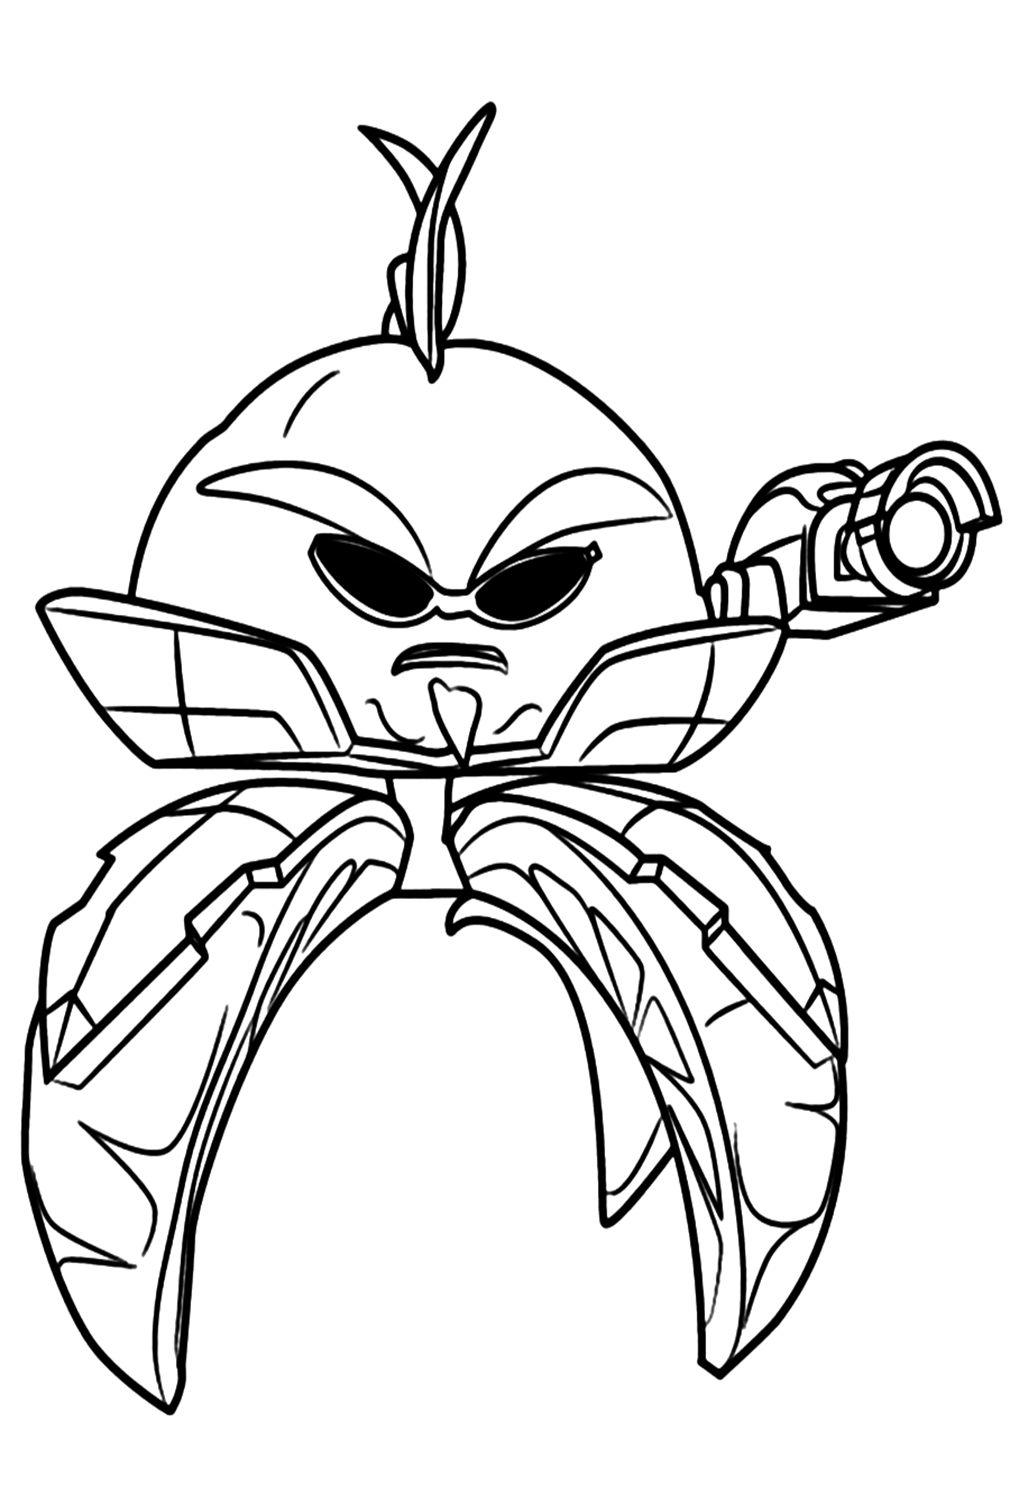 Citron From Plants Vs Zombies Coloring Pages